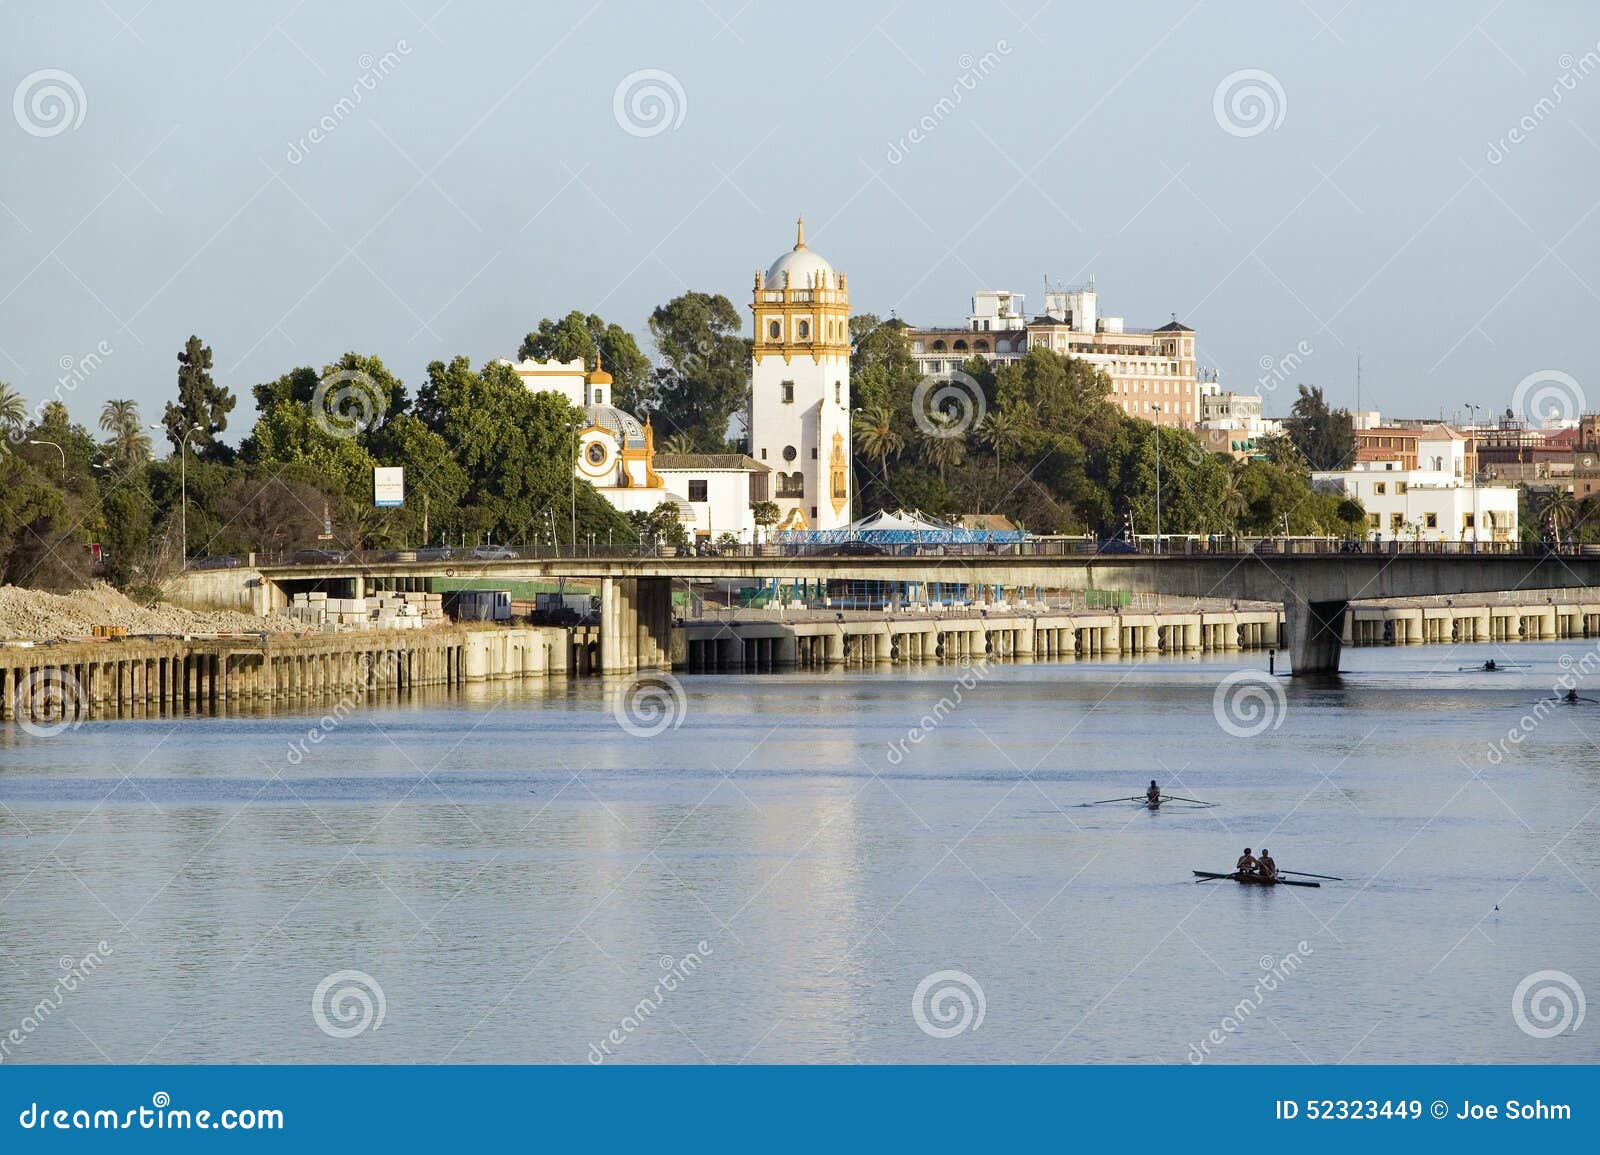 rowers on canal de alfonso of rio guadalquivir river, sevilla, southern spain